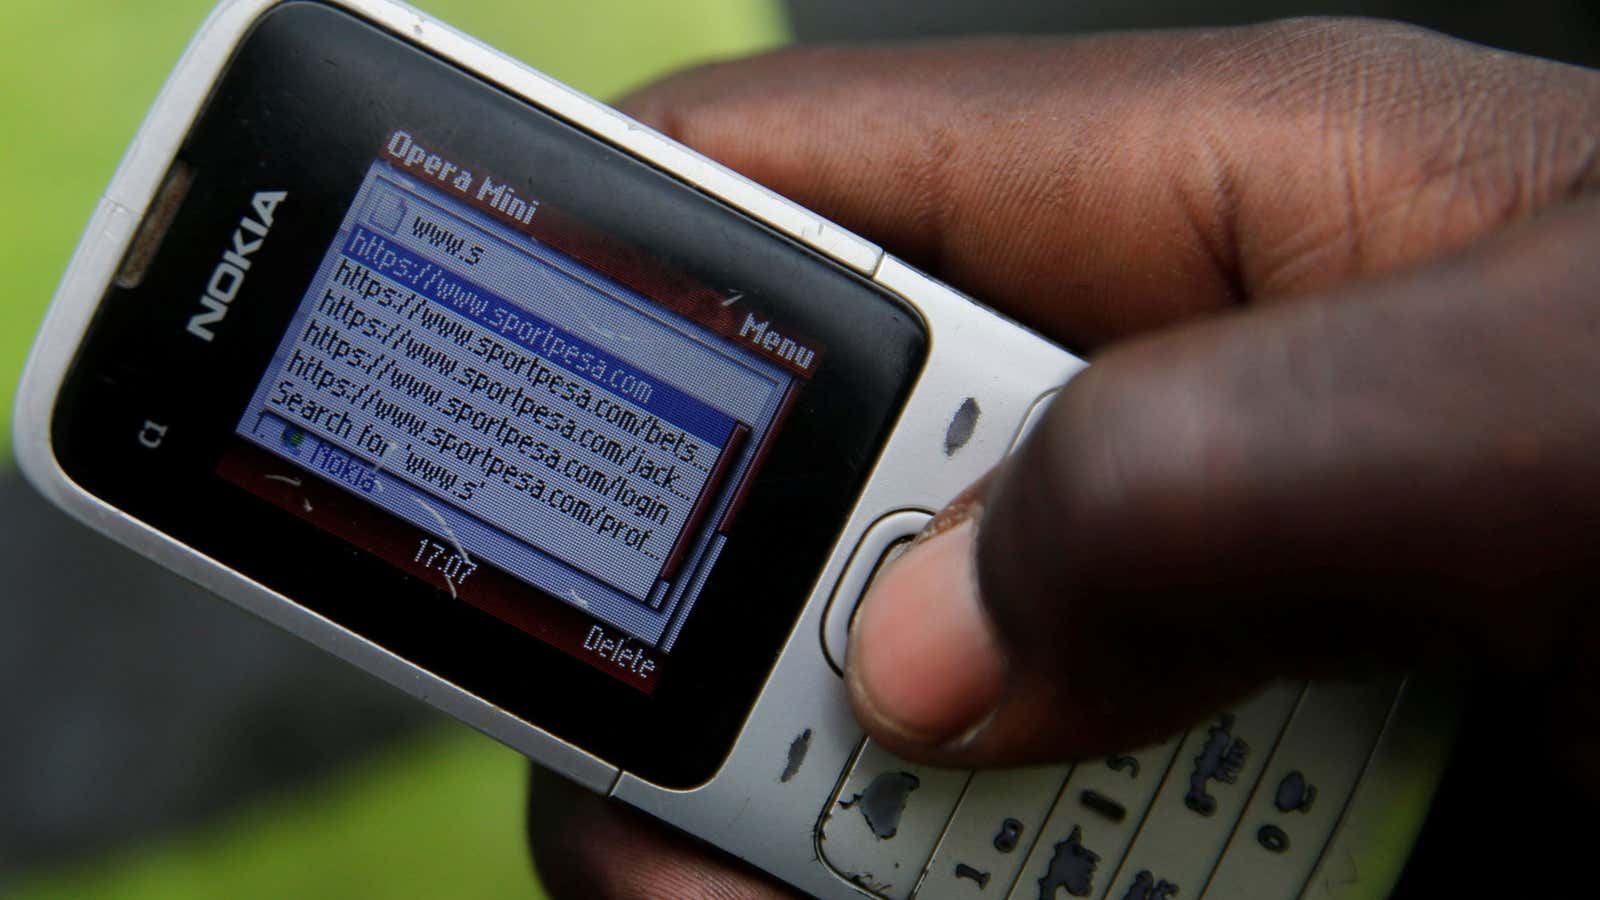 A gambler uses his cell phone to launch the an online betting link in Kenya